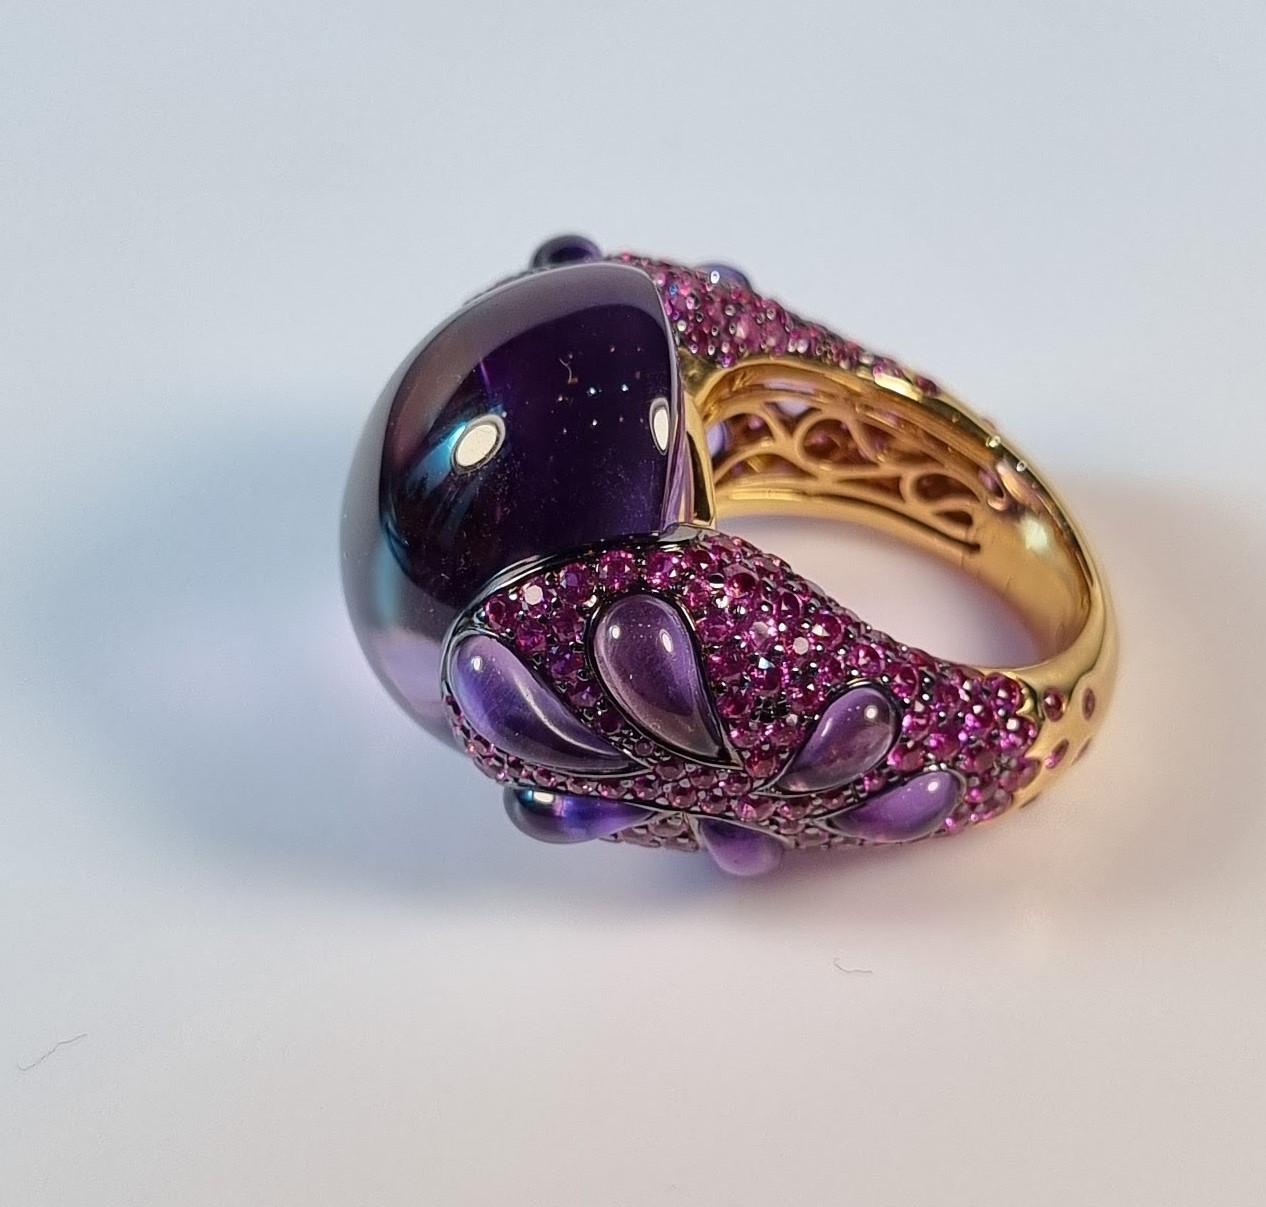 Cabouchon Amethyst and pink sapphires 18k yellow gold ring
Weight 23,34gr Size ring 53 Europe 

Irama Pradera is a dynamic and outgoing designer from Spain that searches always for the best gems and combines classic with contemporary mounting and